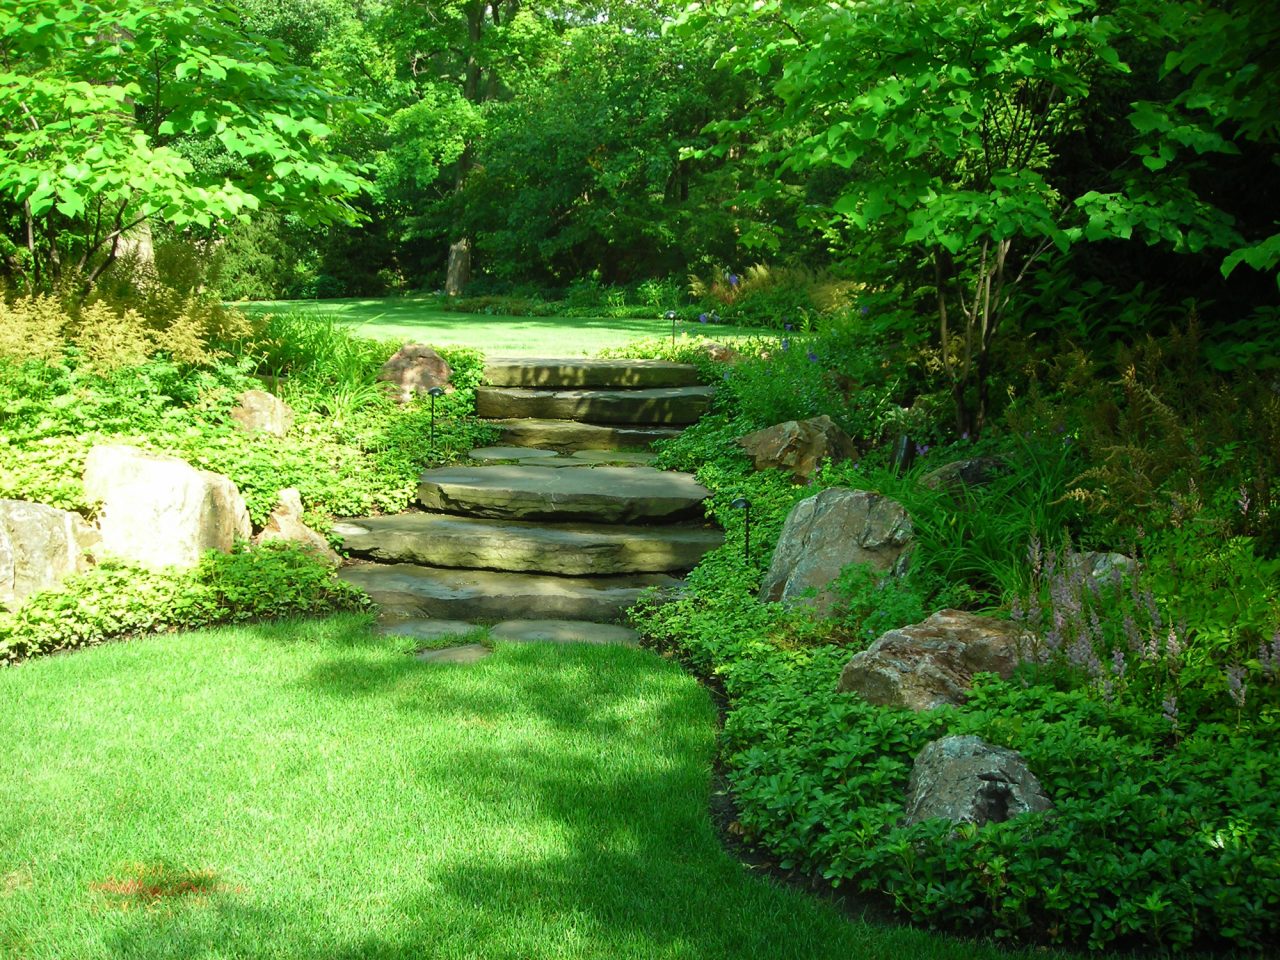 Fieldstone slab steps with boulder outcroppings leading to freshly mowed lawn